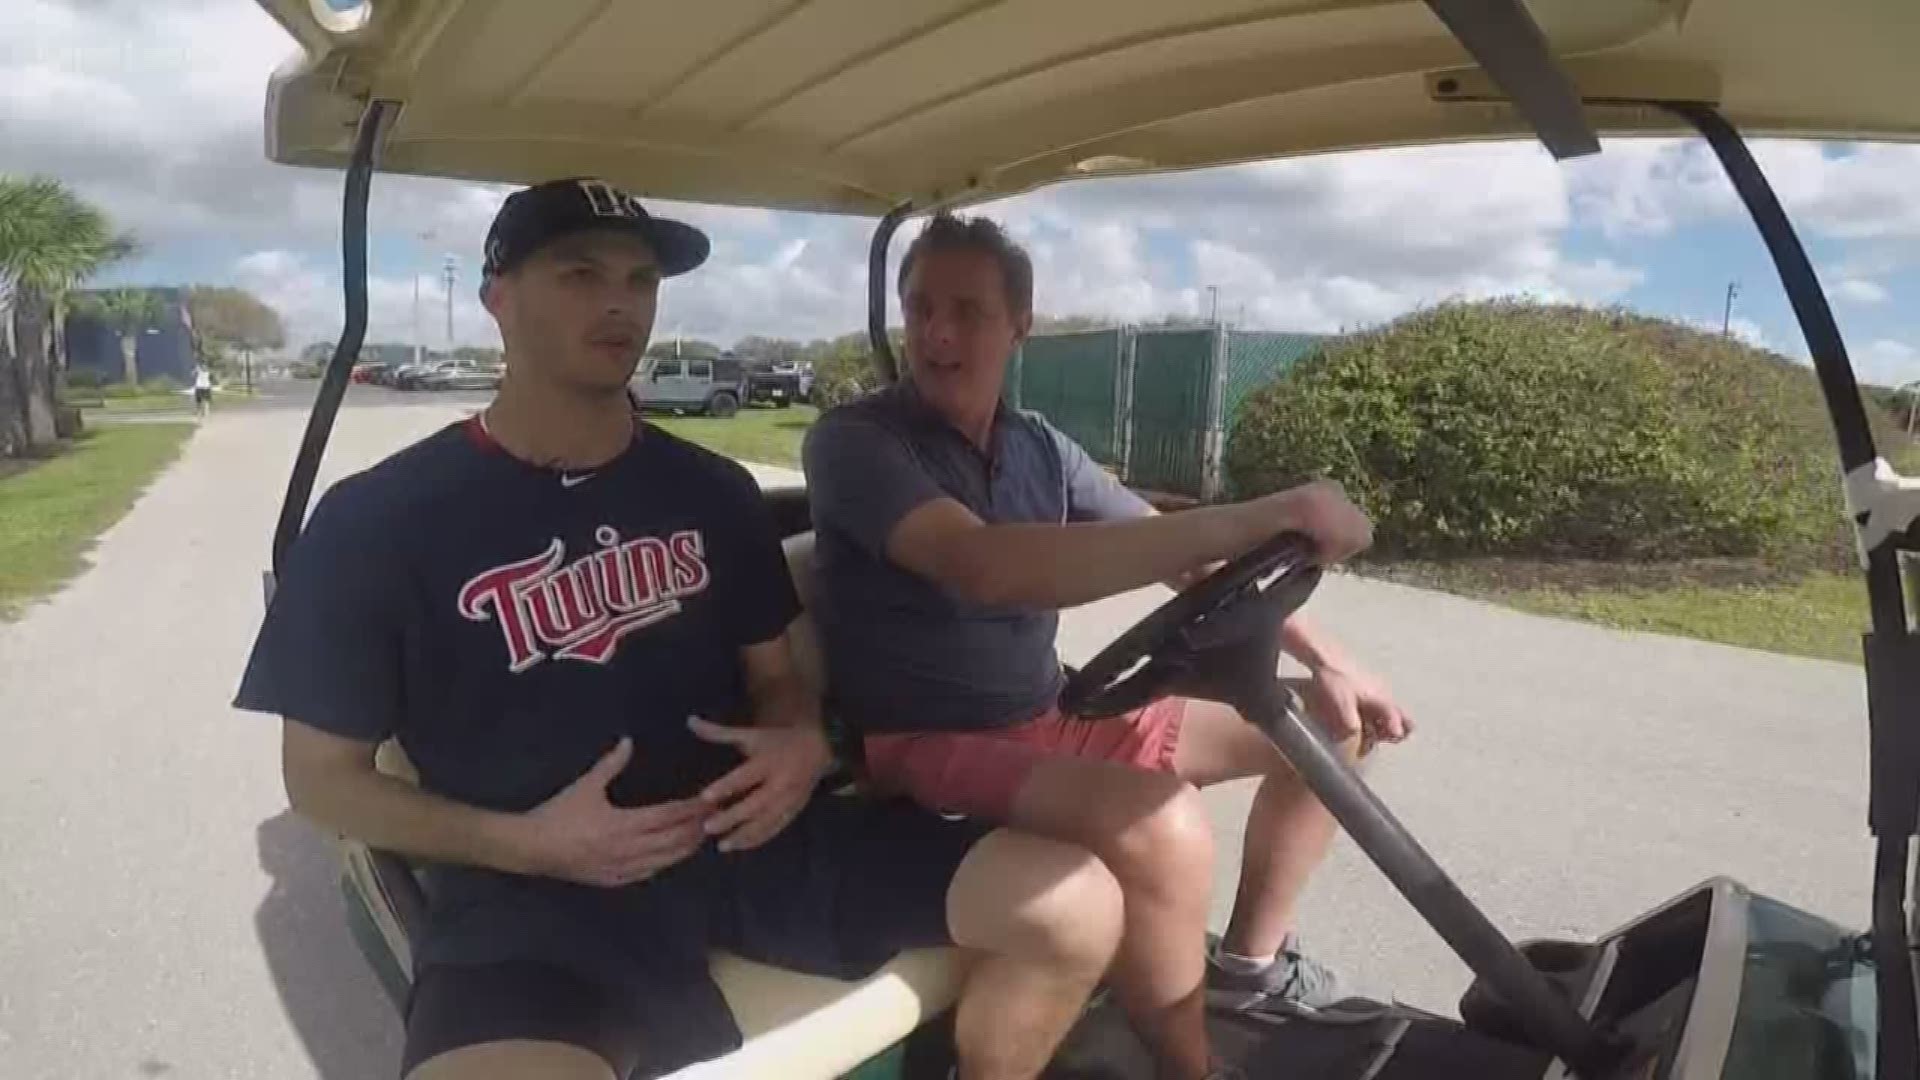 KARE 11 Sports Director Eric Perkins took a spin around the CenturyLink Sports Complex with Twins pitcher Taylor Rogers to get his take on the upcoming season.